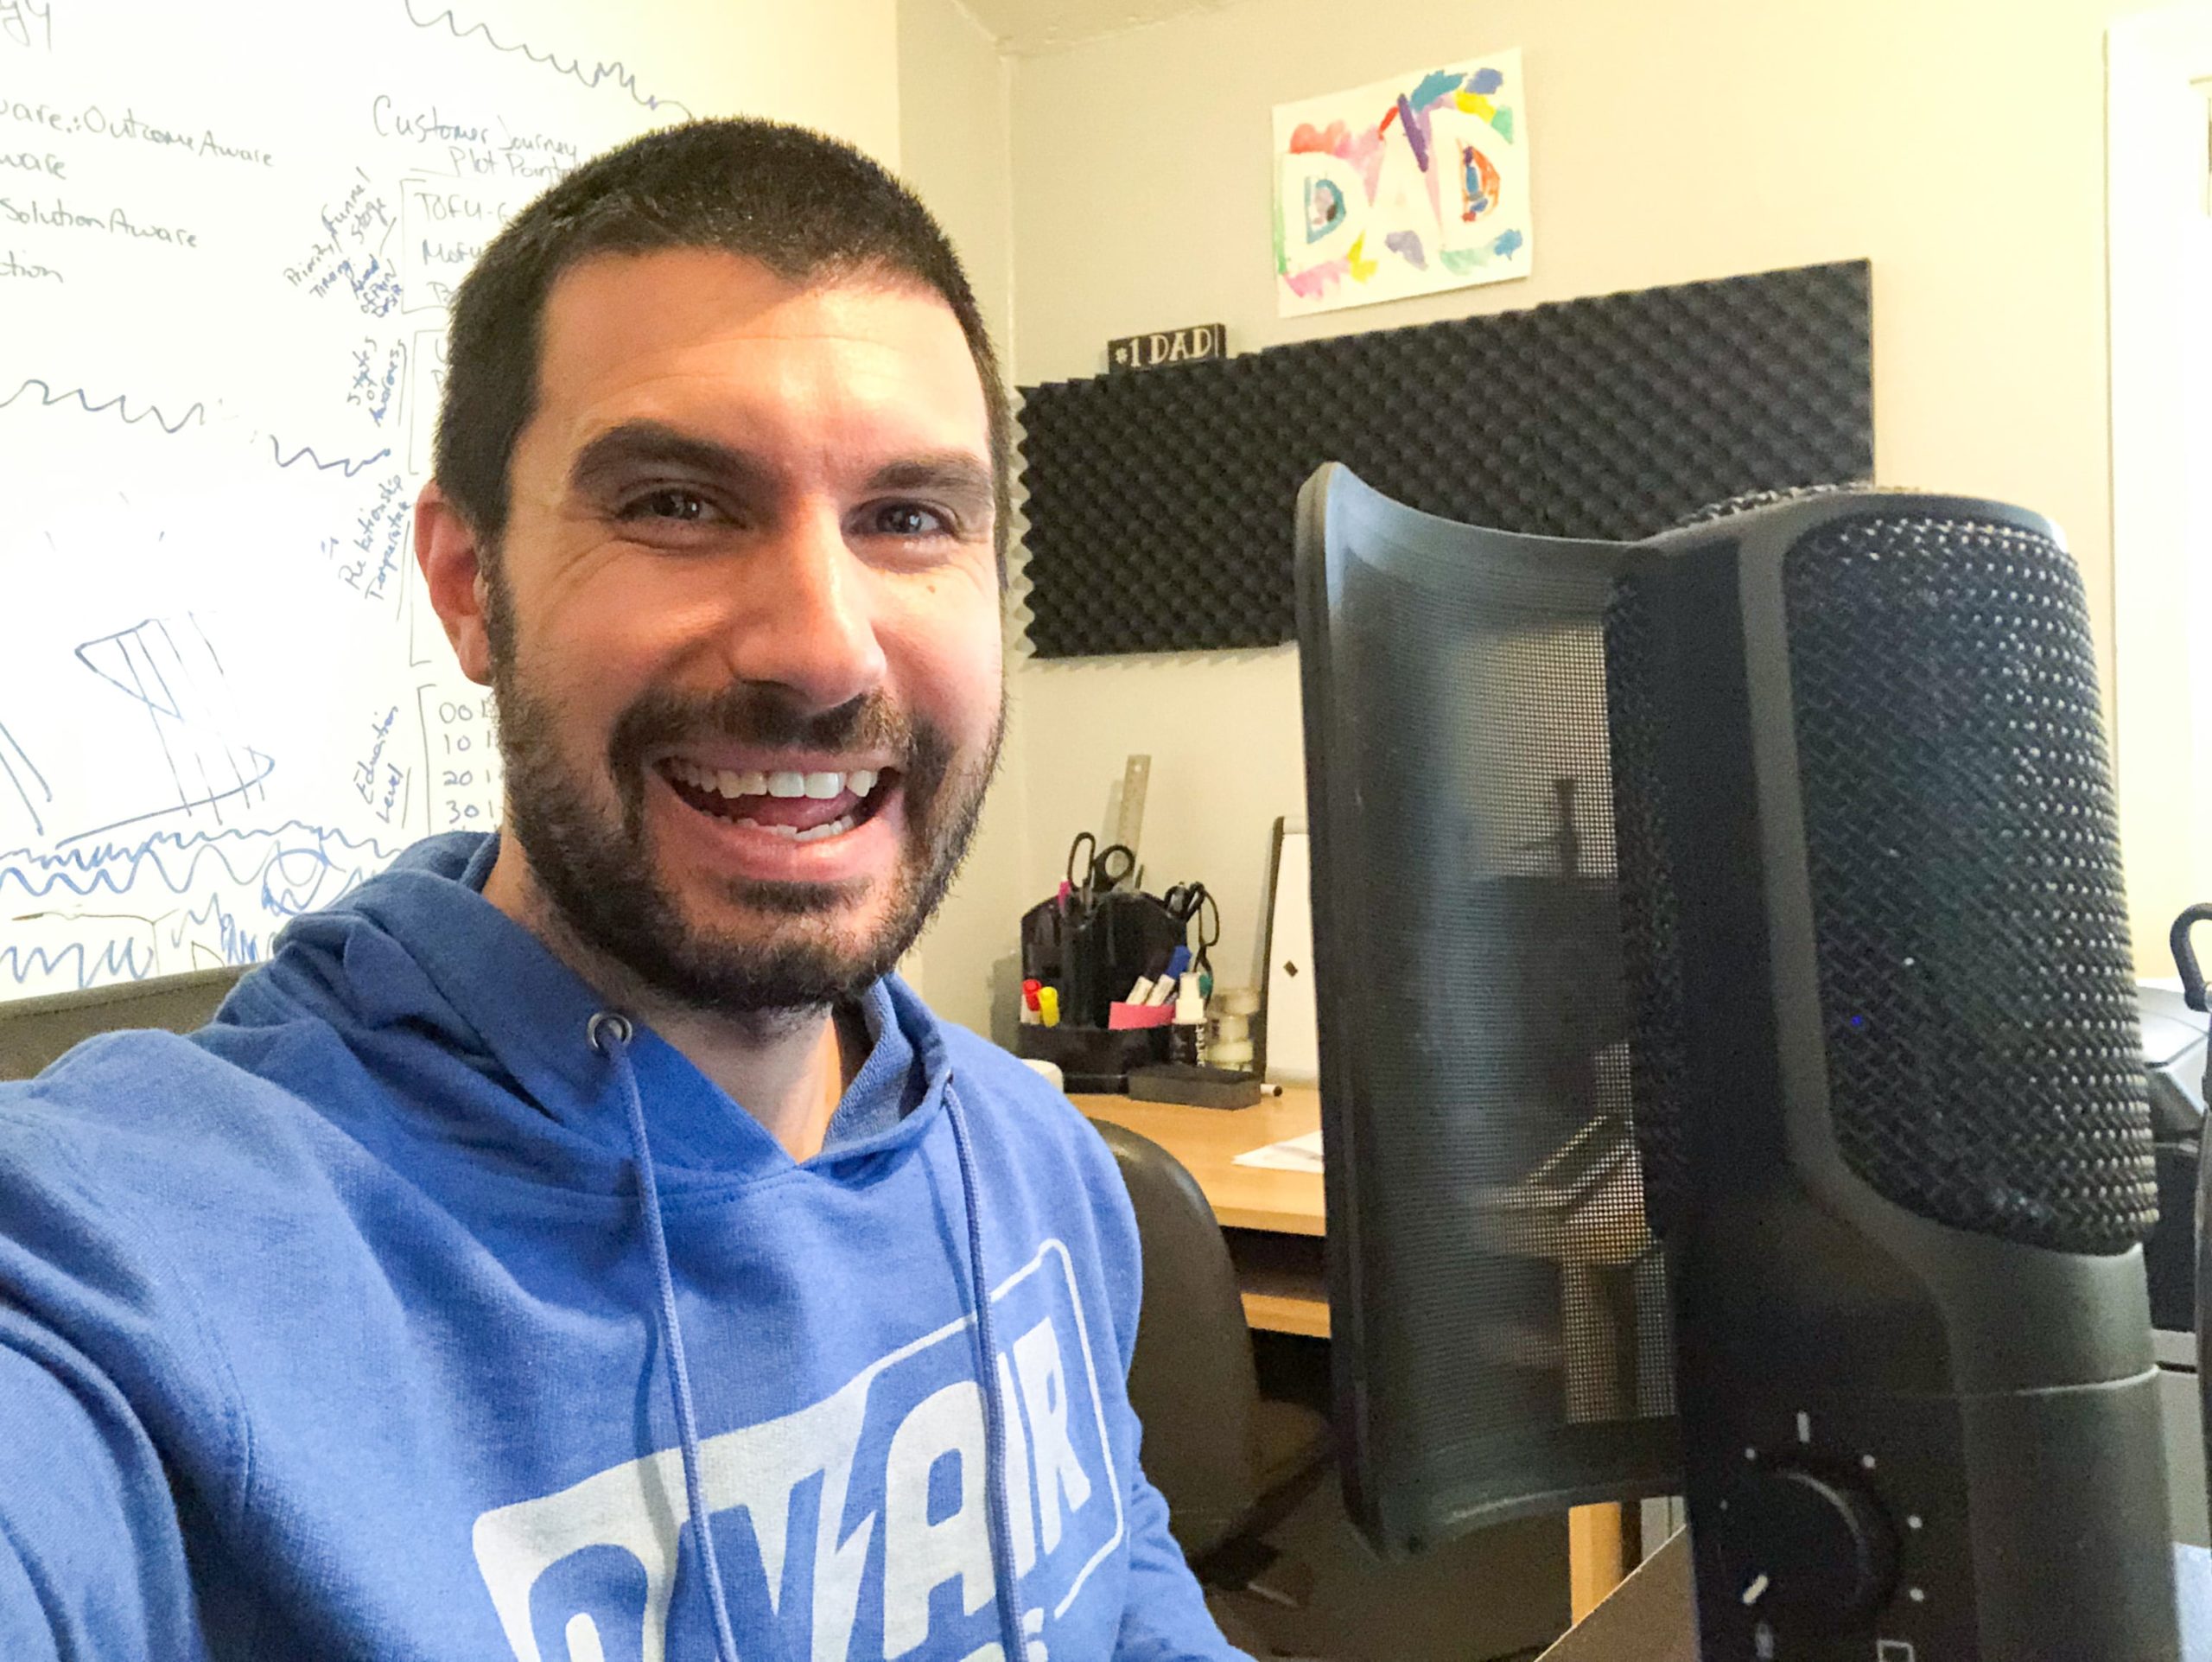 todd podcasting smile mic oab announcement